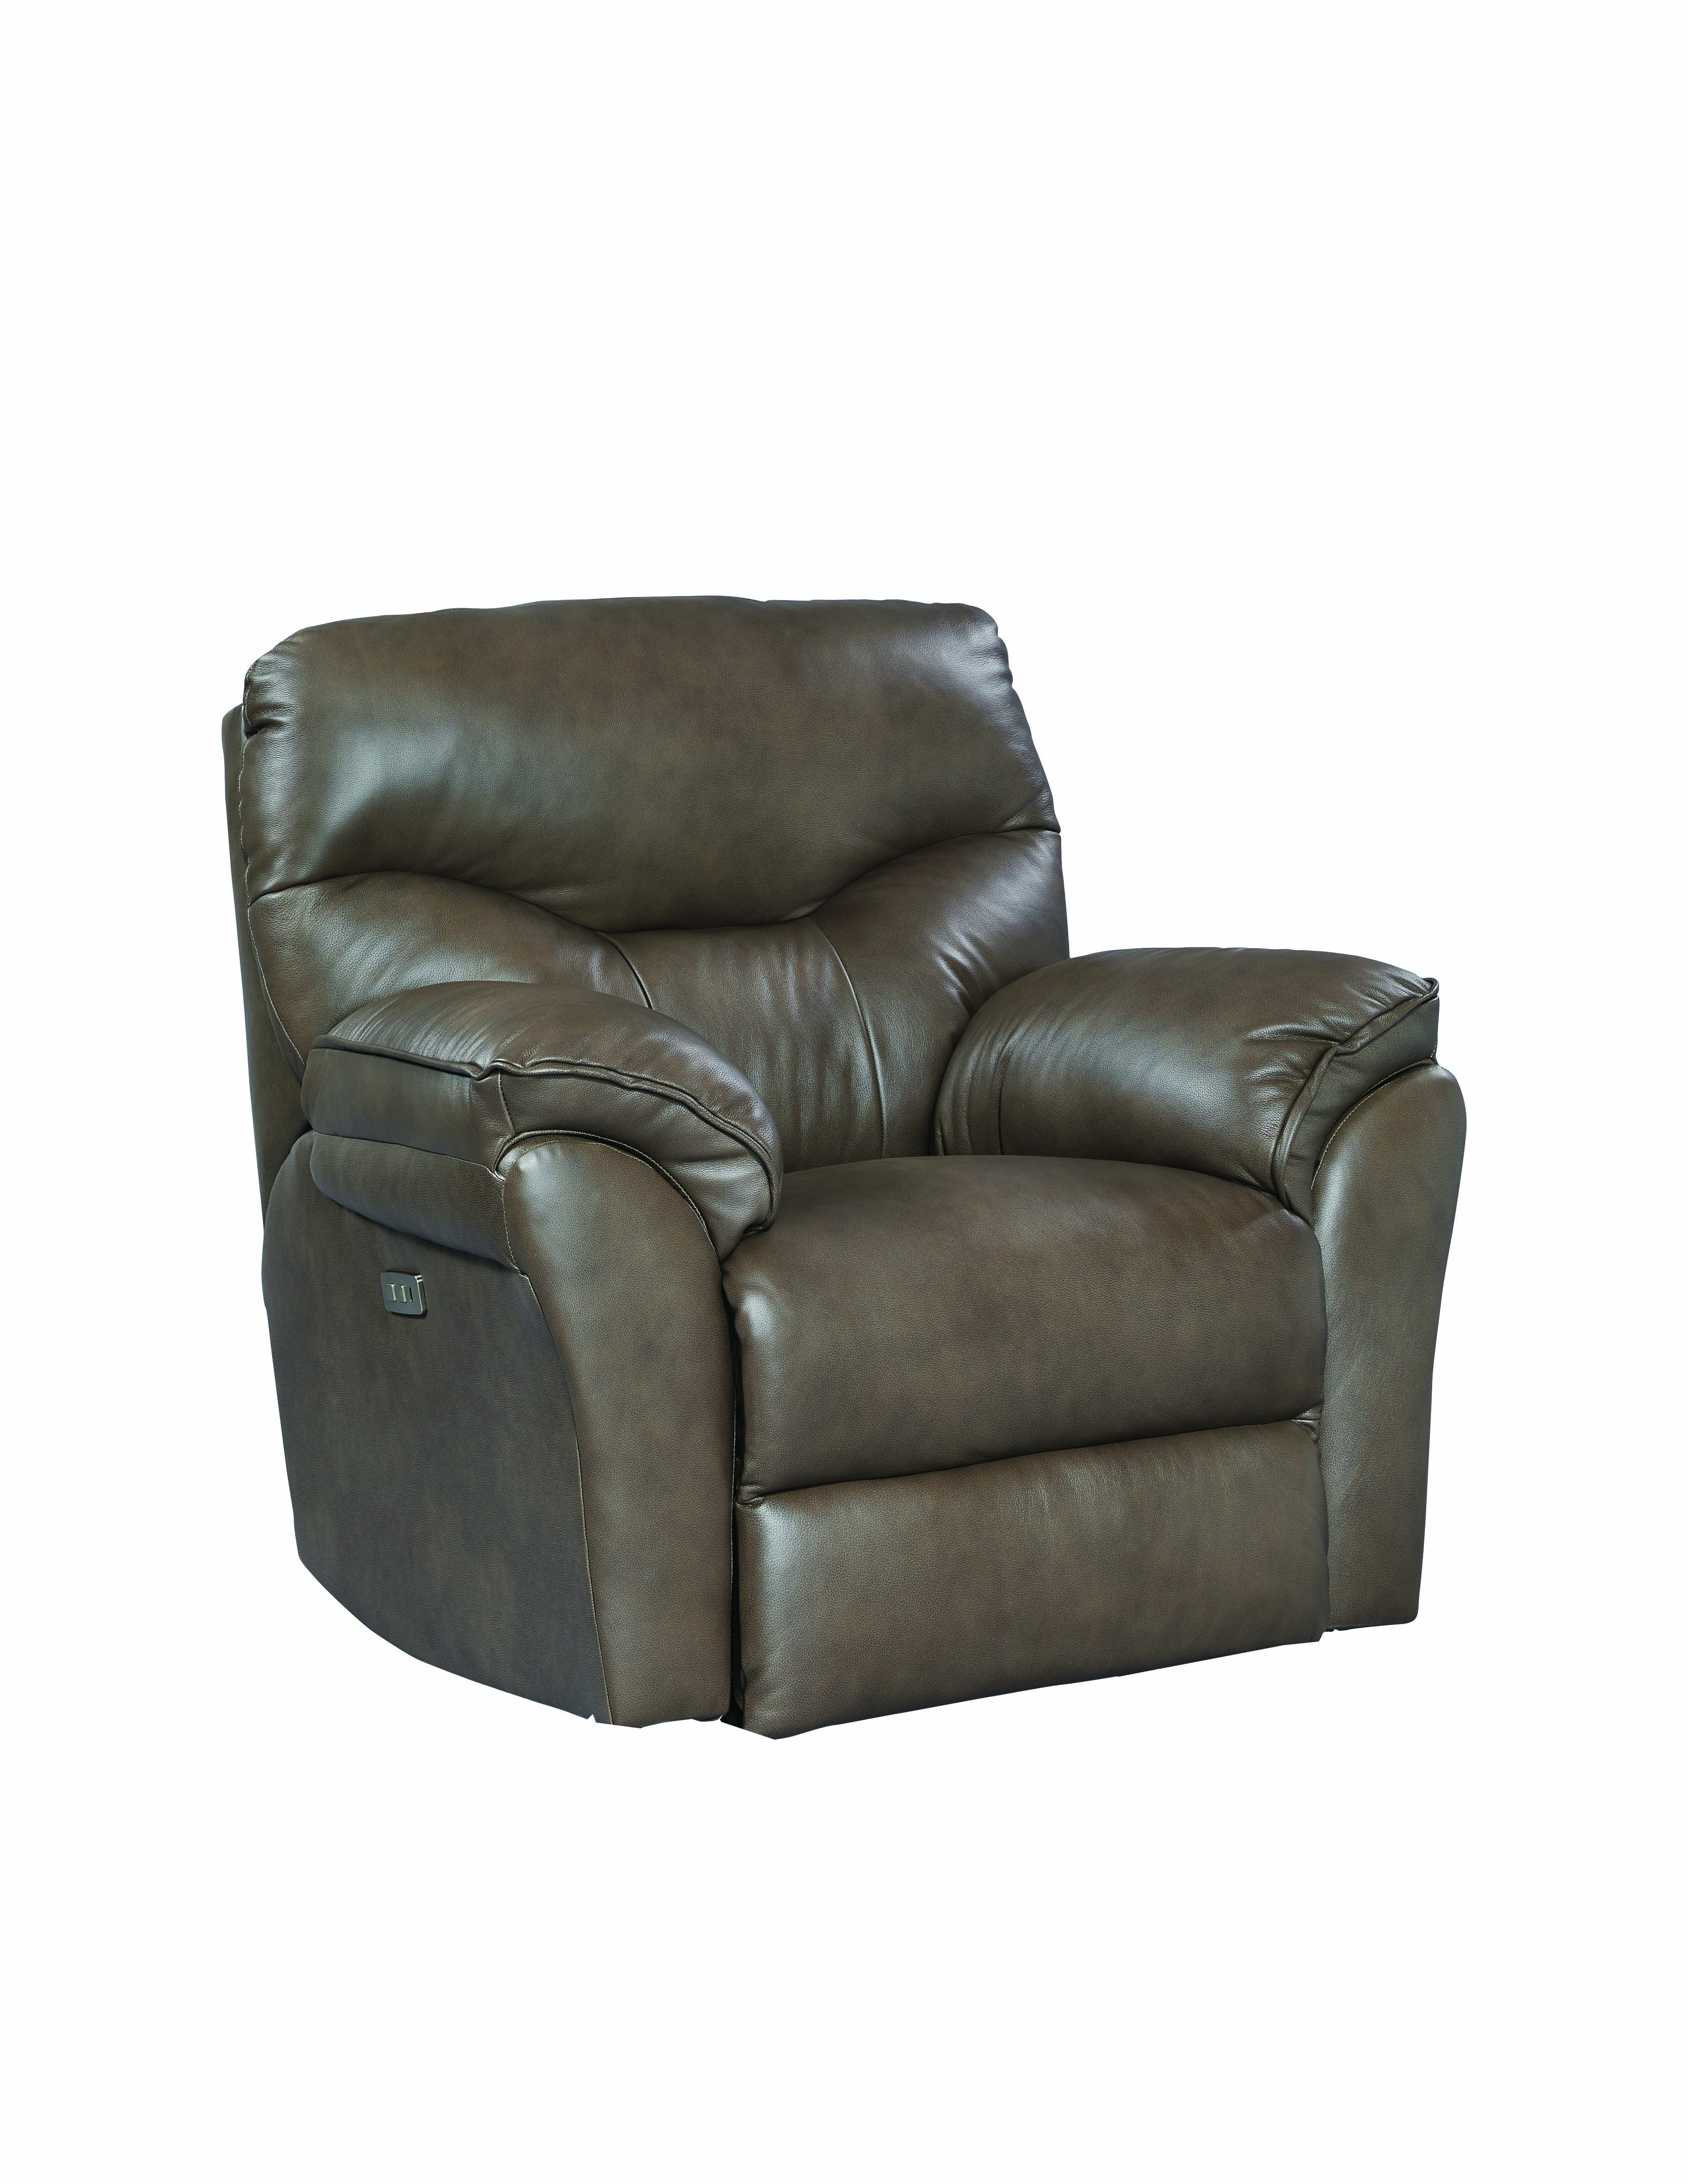 363 Power Play Recliner Image